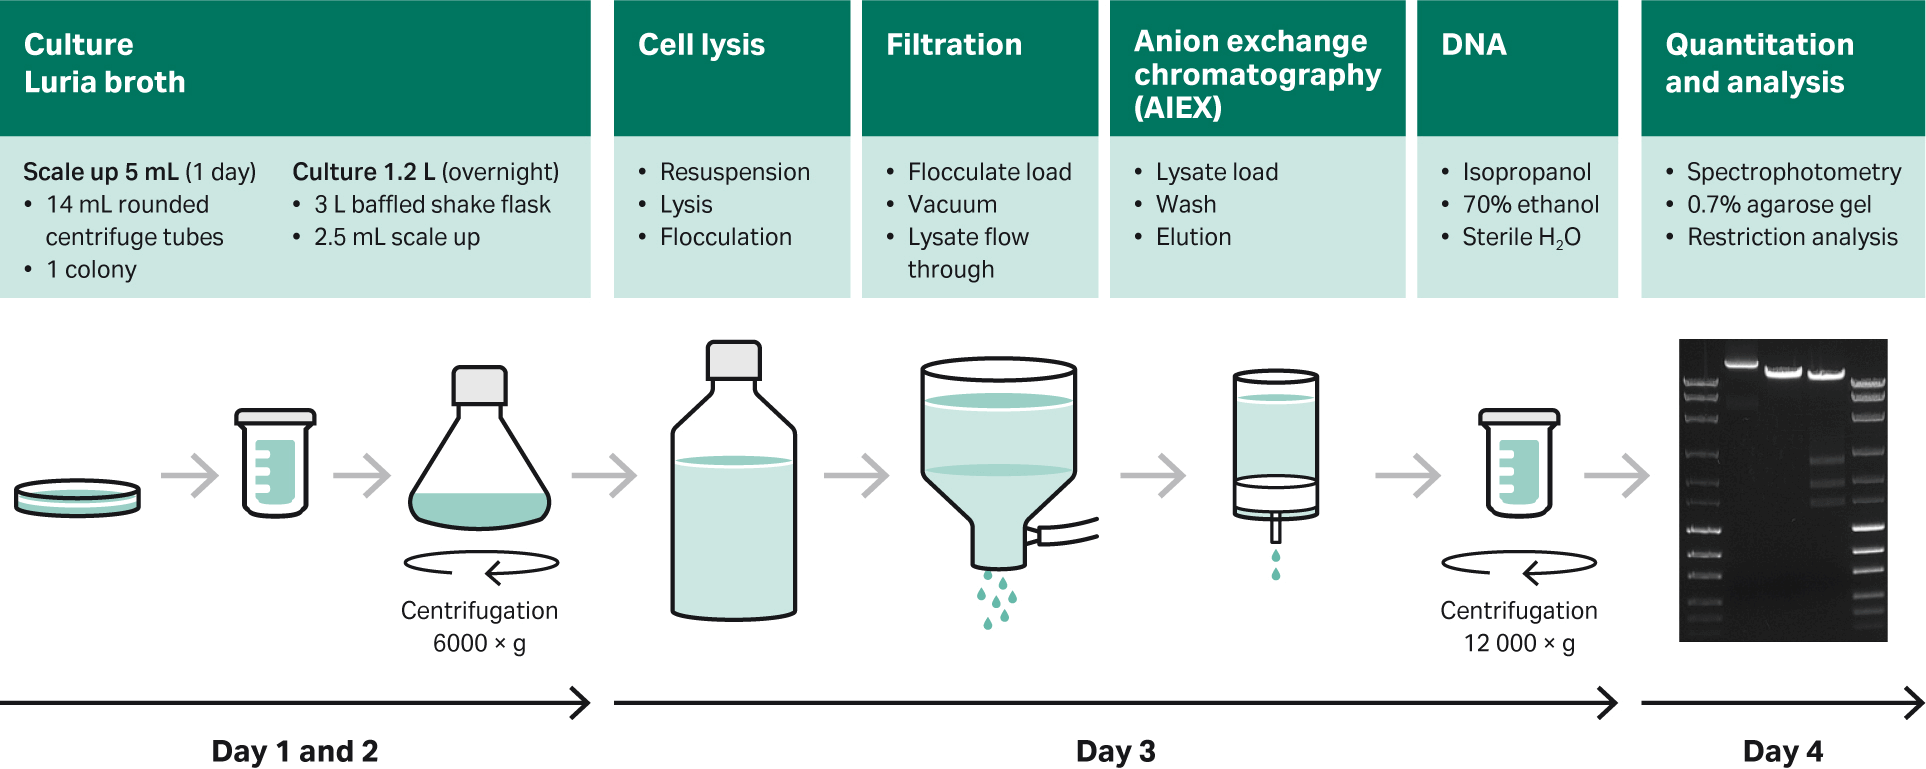 Overview of plasmid preparation using Luria broth, shake flasks, and purification with commercially available purification kits.